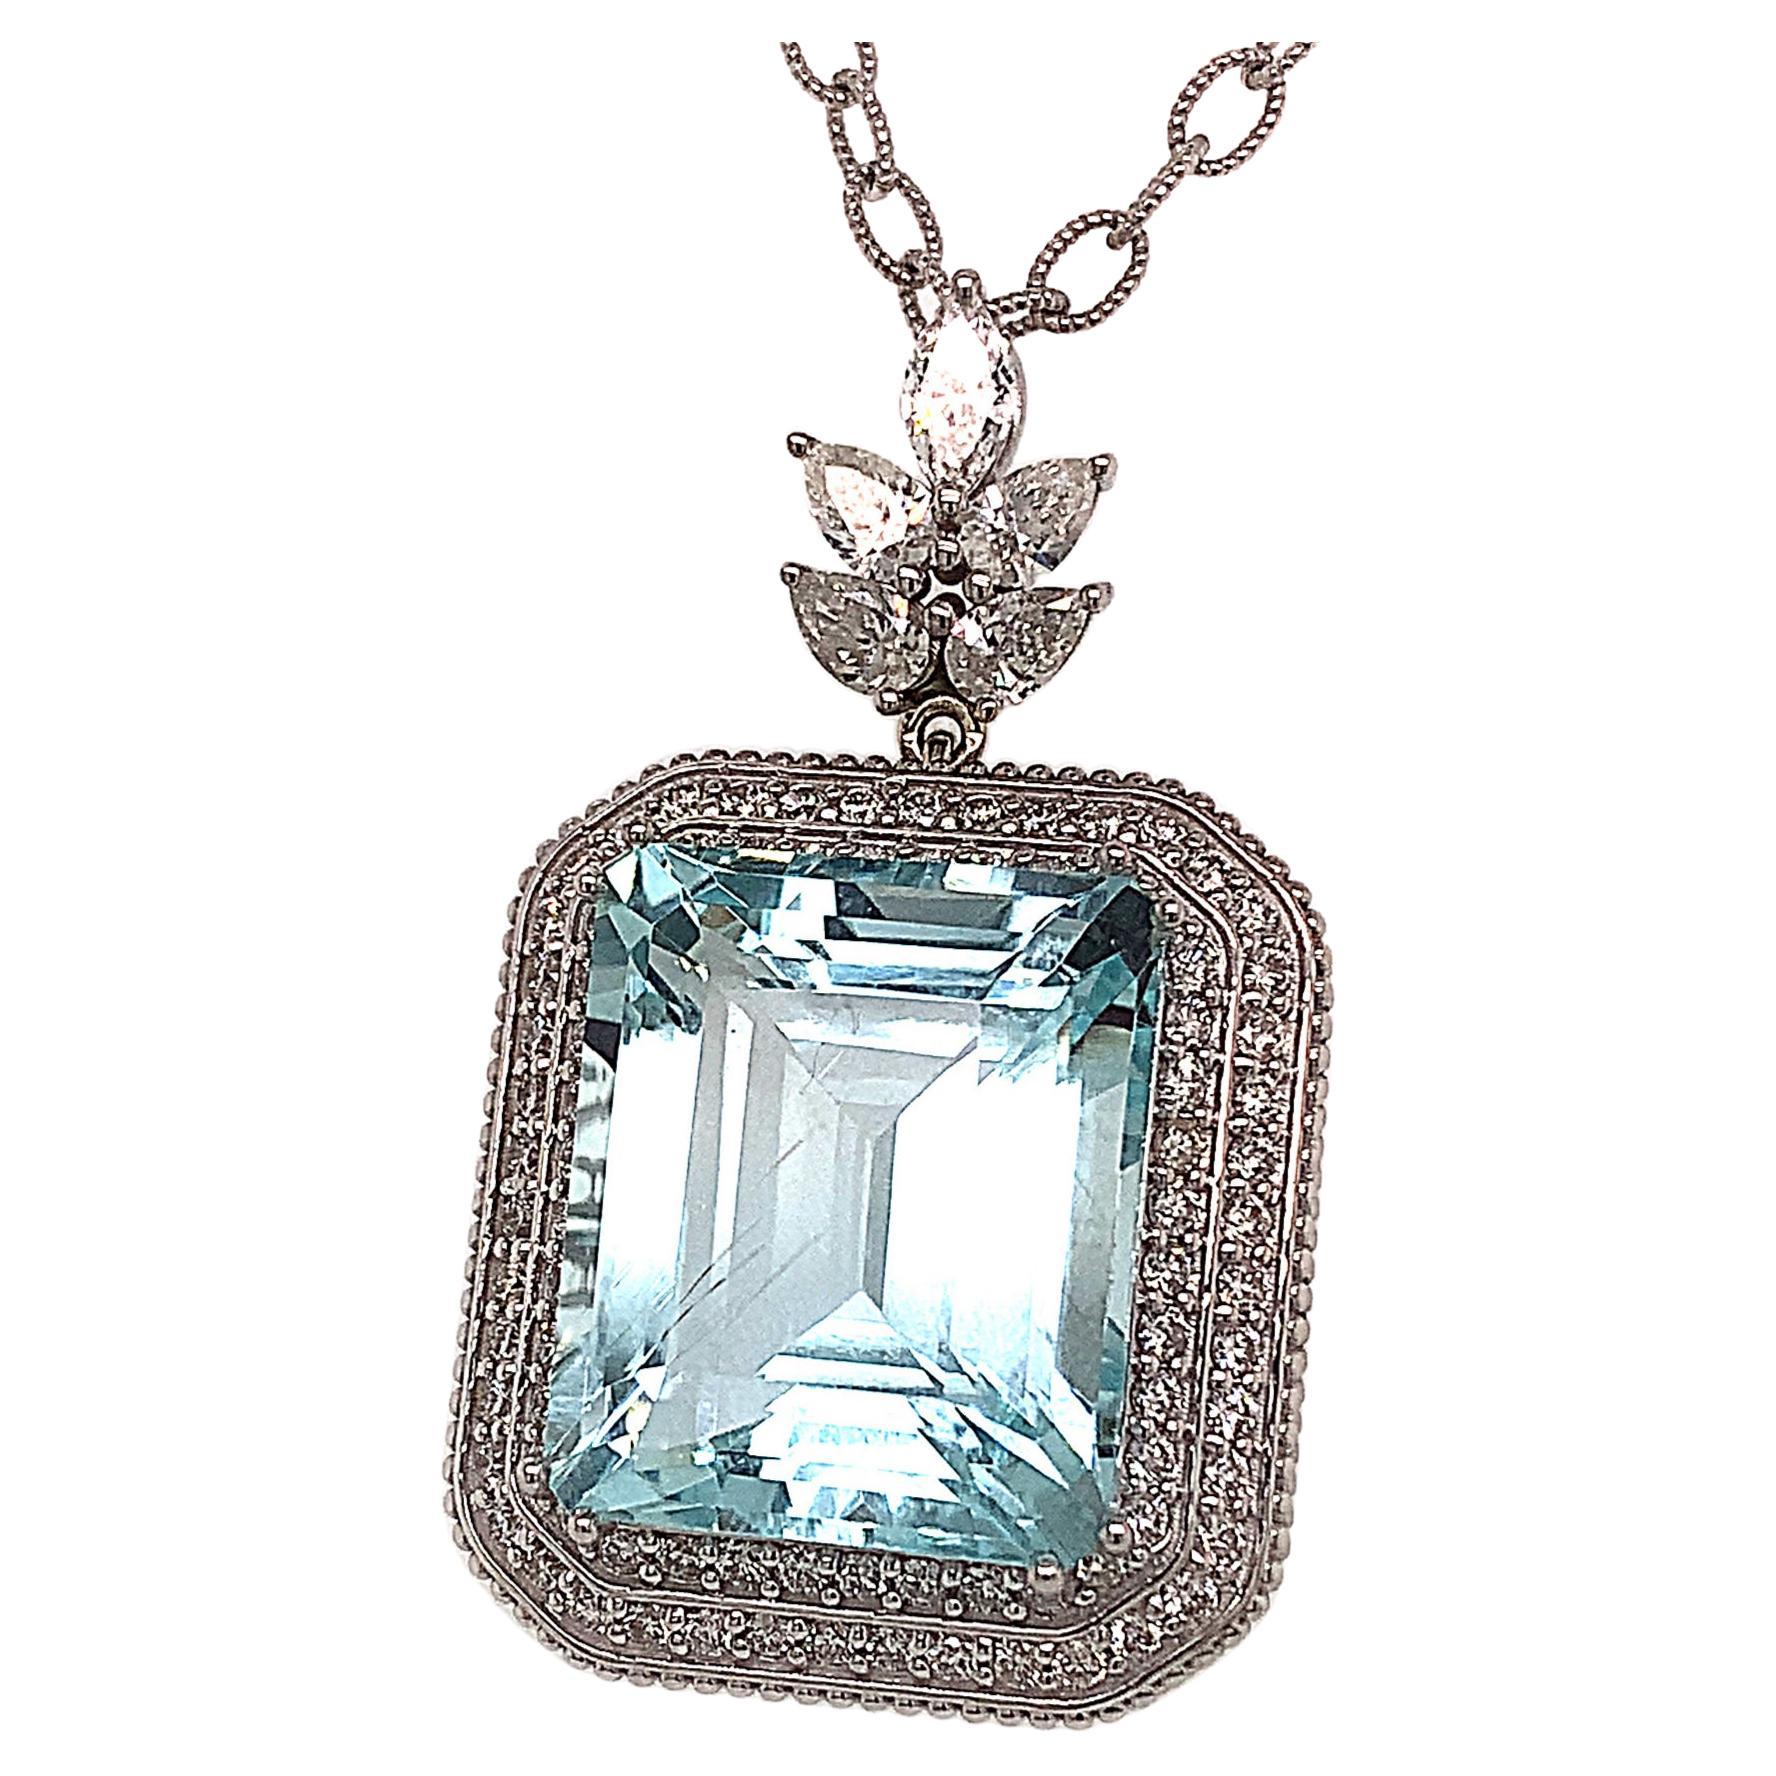 Natural Aquamarine Diamond Gold Necklace 27 TCW GIA Certified $16, 475 121172 For Sale